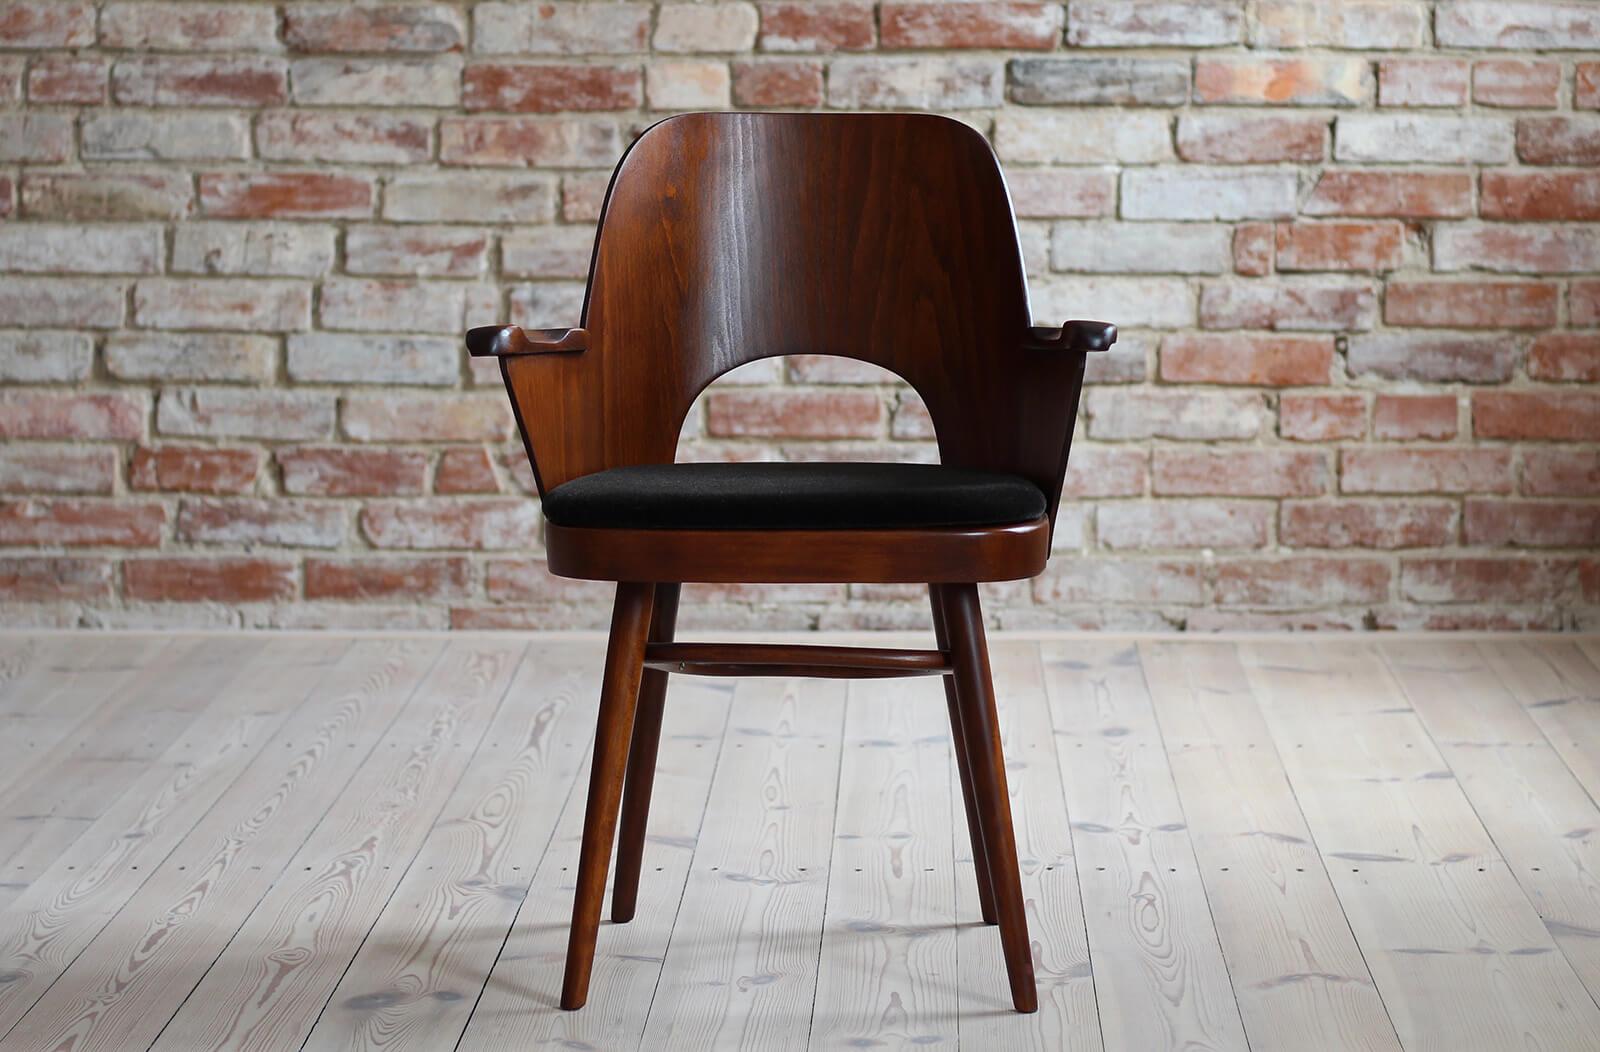 Bentwood Set of 4 Midcentury Dining Chairs by L. Hofmann, Reupholstered in Kvadrat Fabric